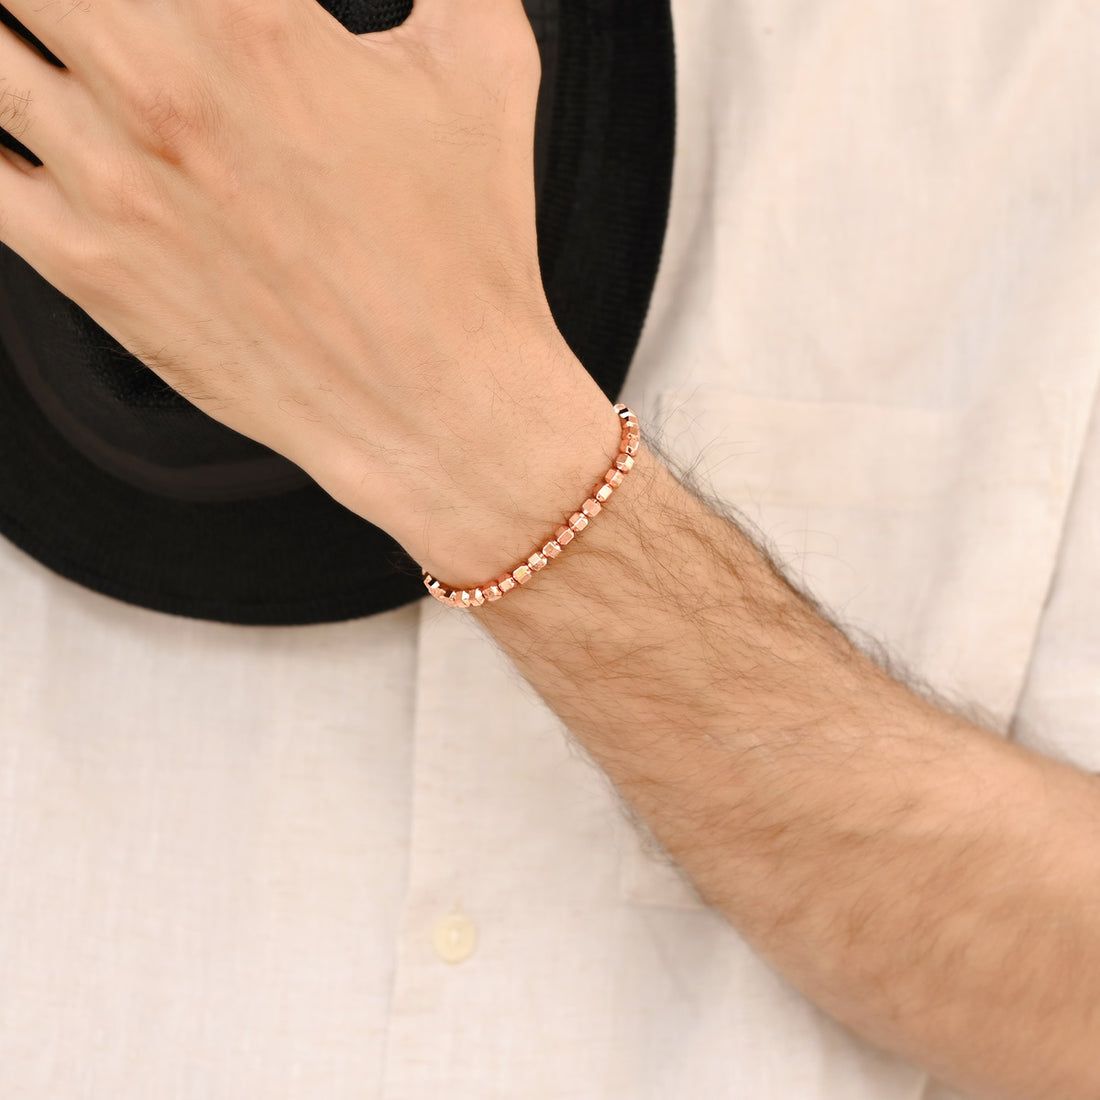 Rose Gold Hematite Bicone Stretch Bracelet: Smooth 4mm bicone beads in radiant rose gold hue.